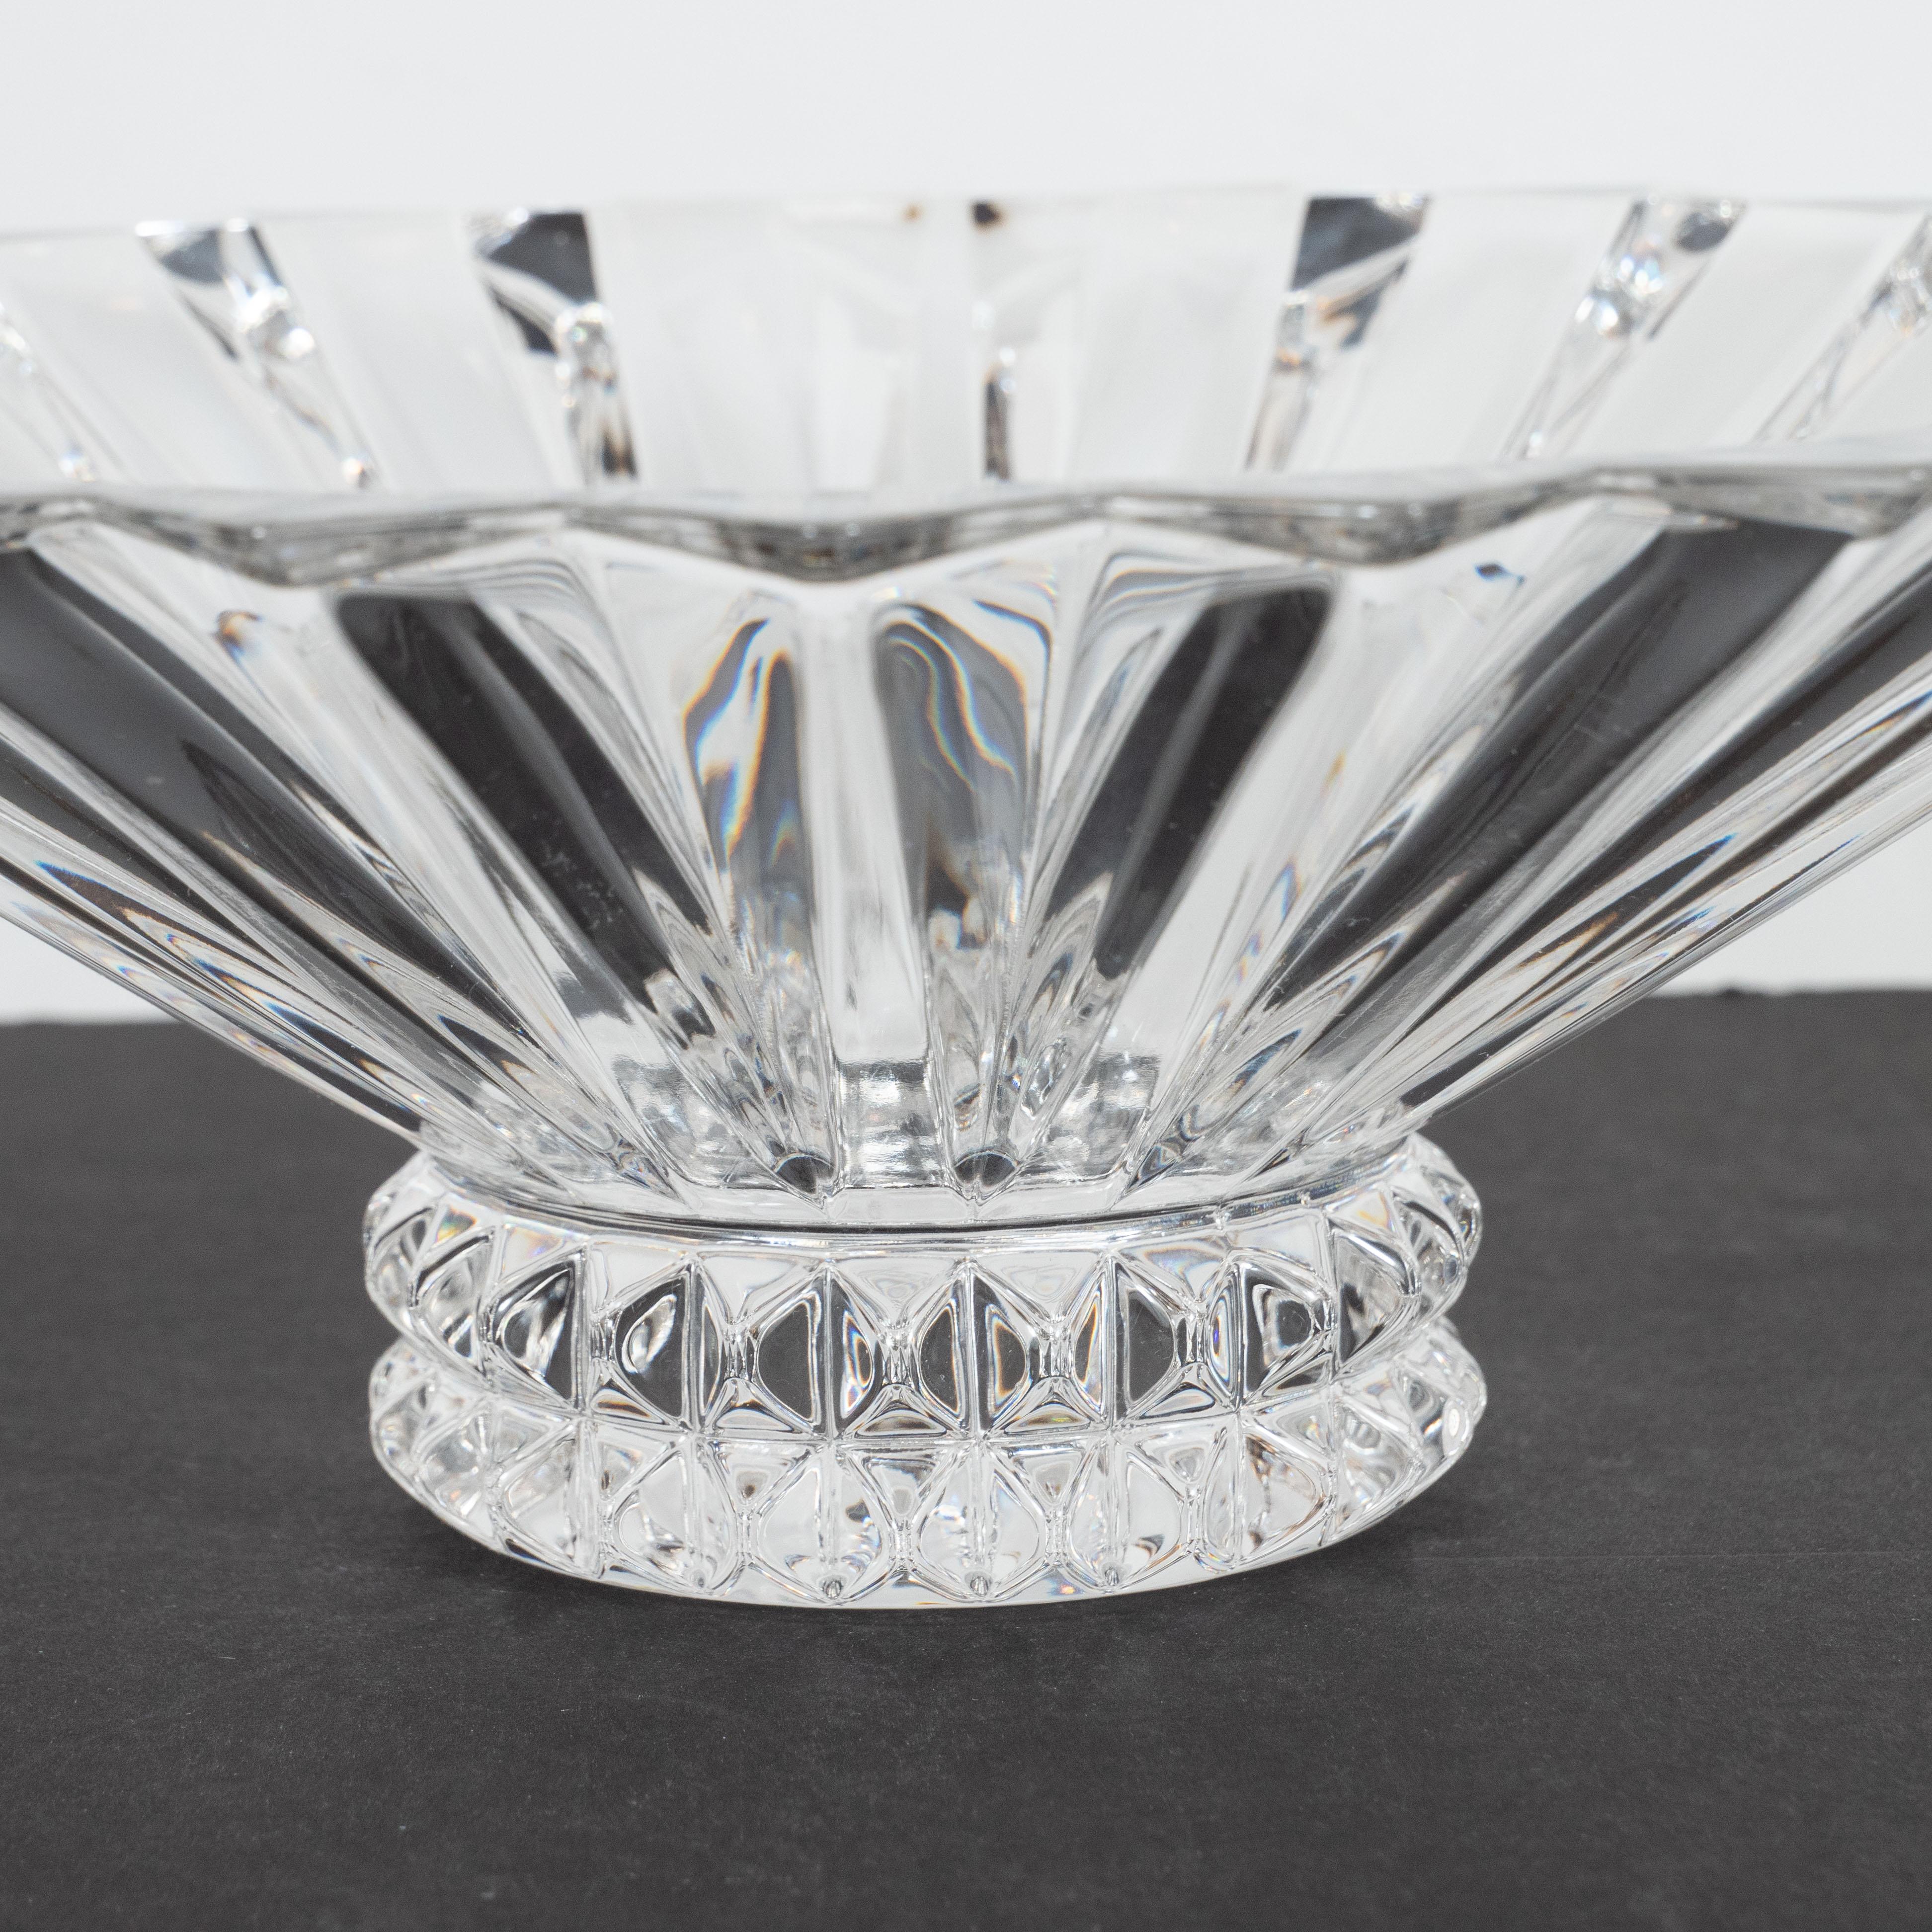 Mid-Century Modern Crystal Centerpiece Bowl with Geometric Designs by Rosenthal 1